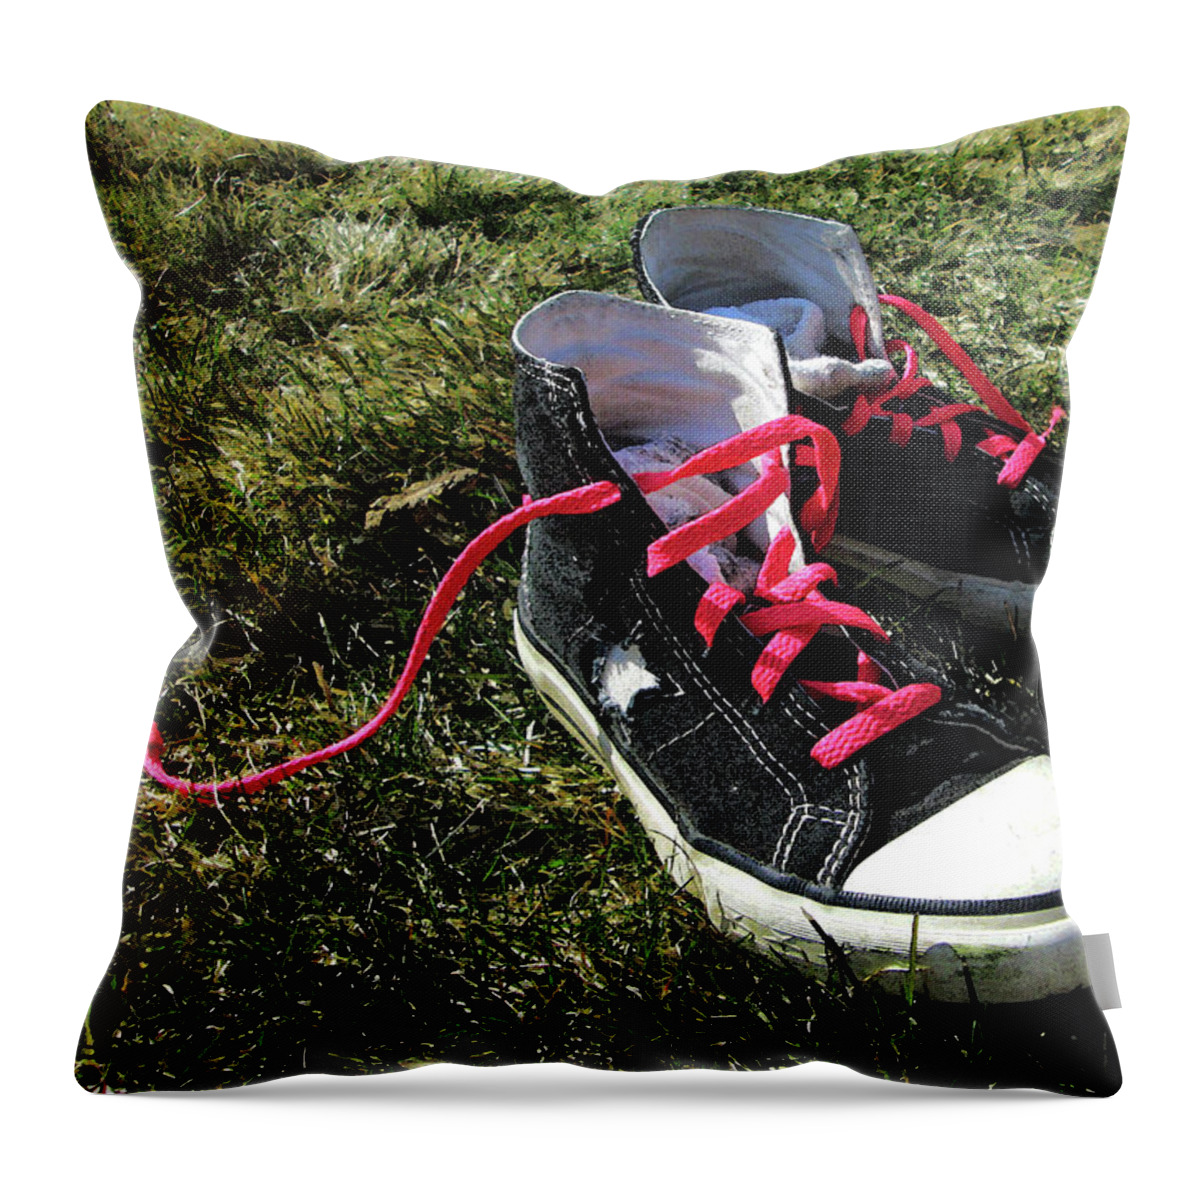 Sneakers Throw Pillow featuring the digital art Pink Shoe Laces by Mary Capriole